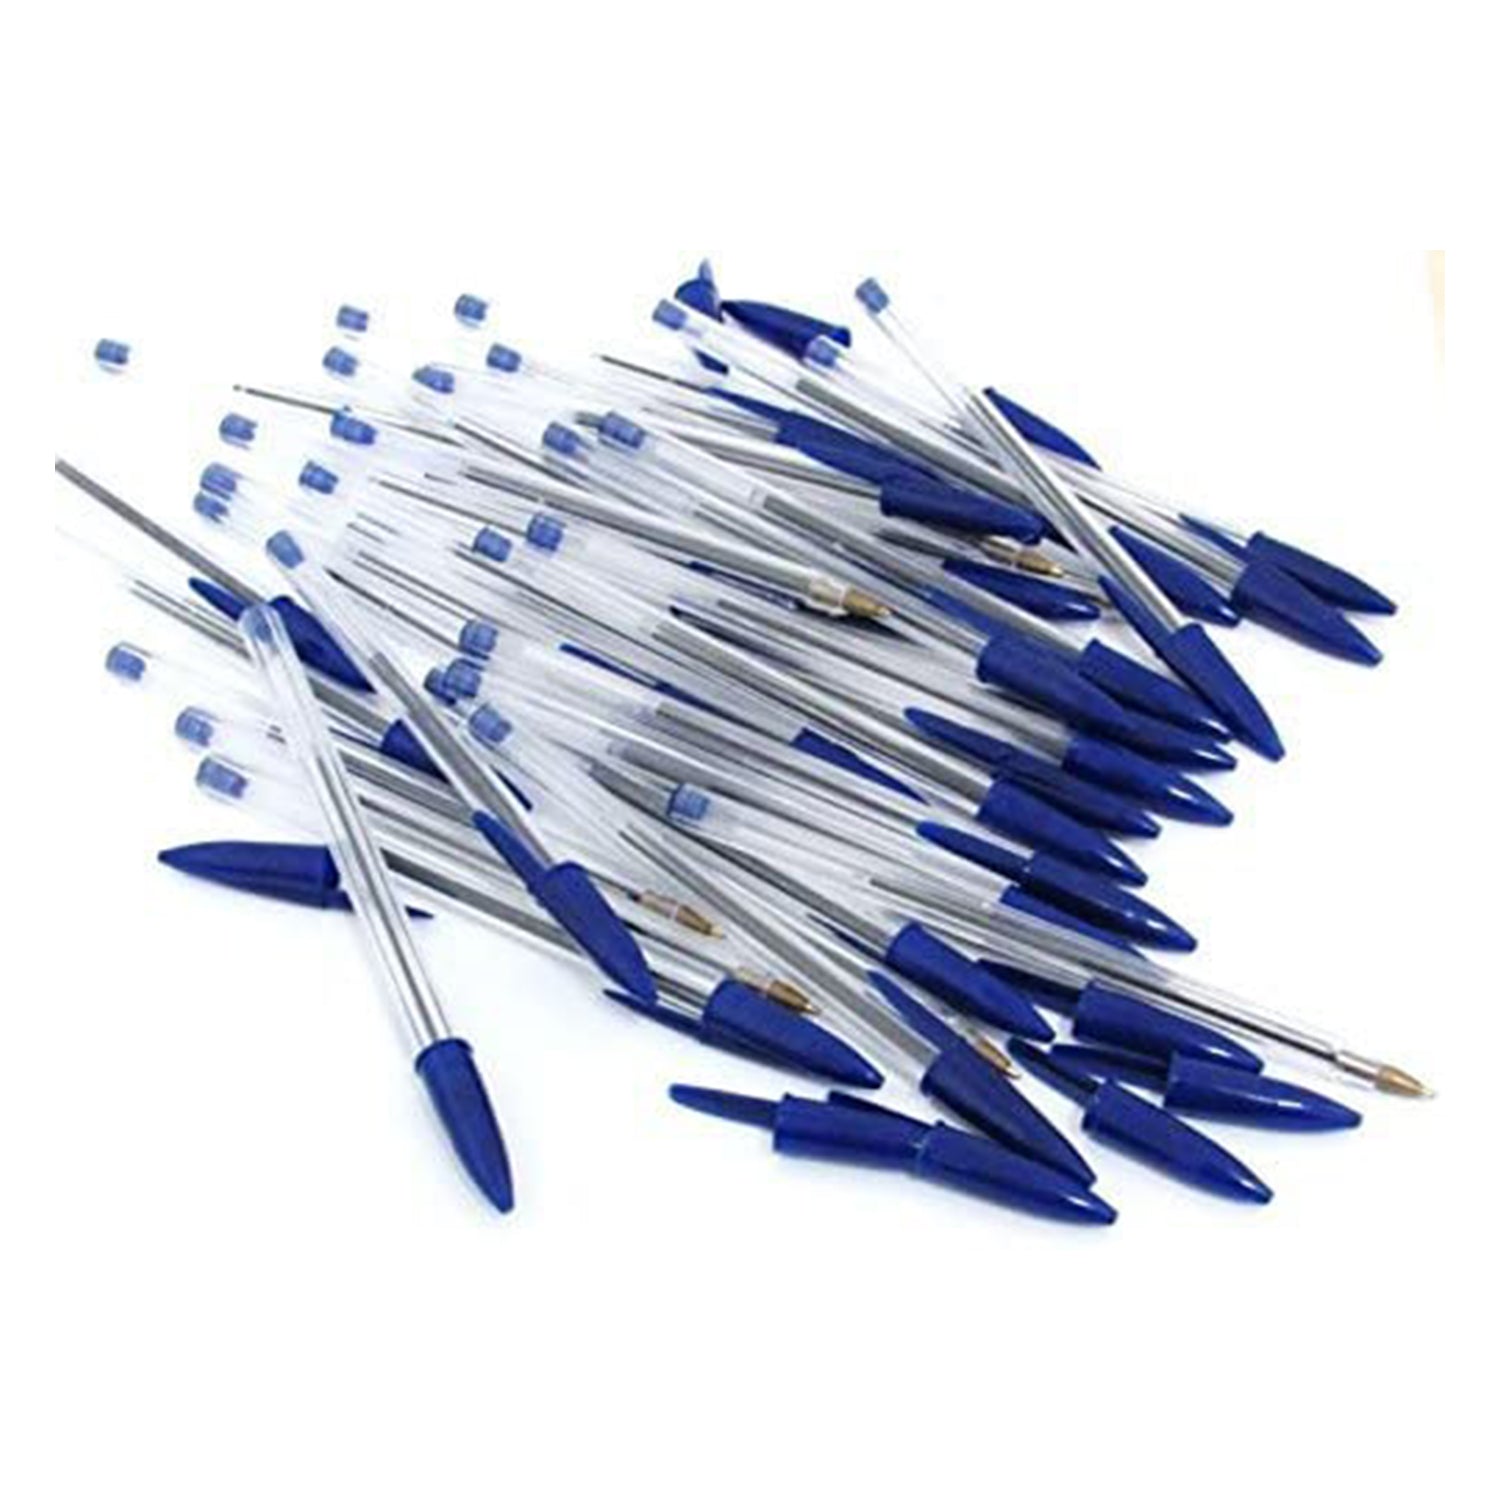 4760 Comfort & Extra Smooth Writing Ball Pen (Pack of 100Pcs)